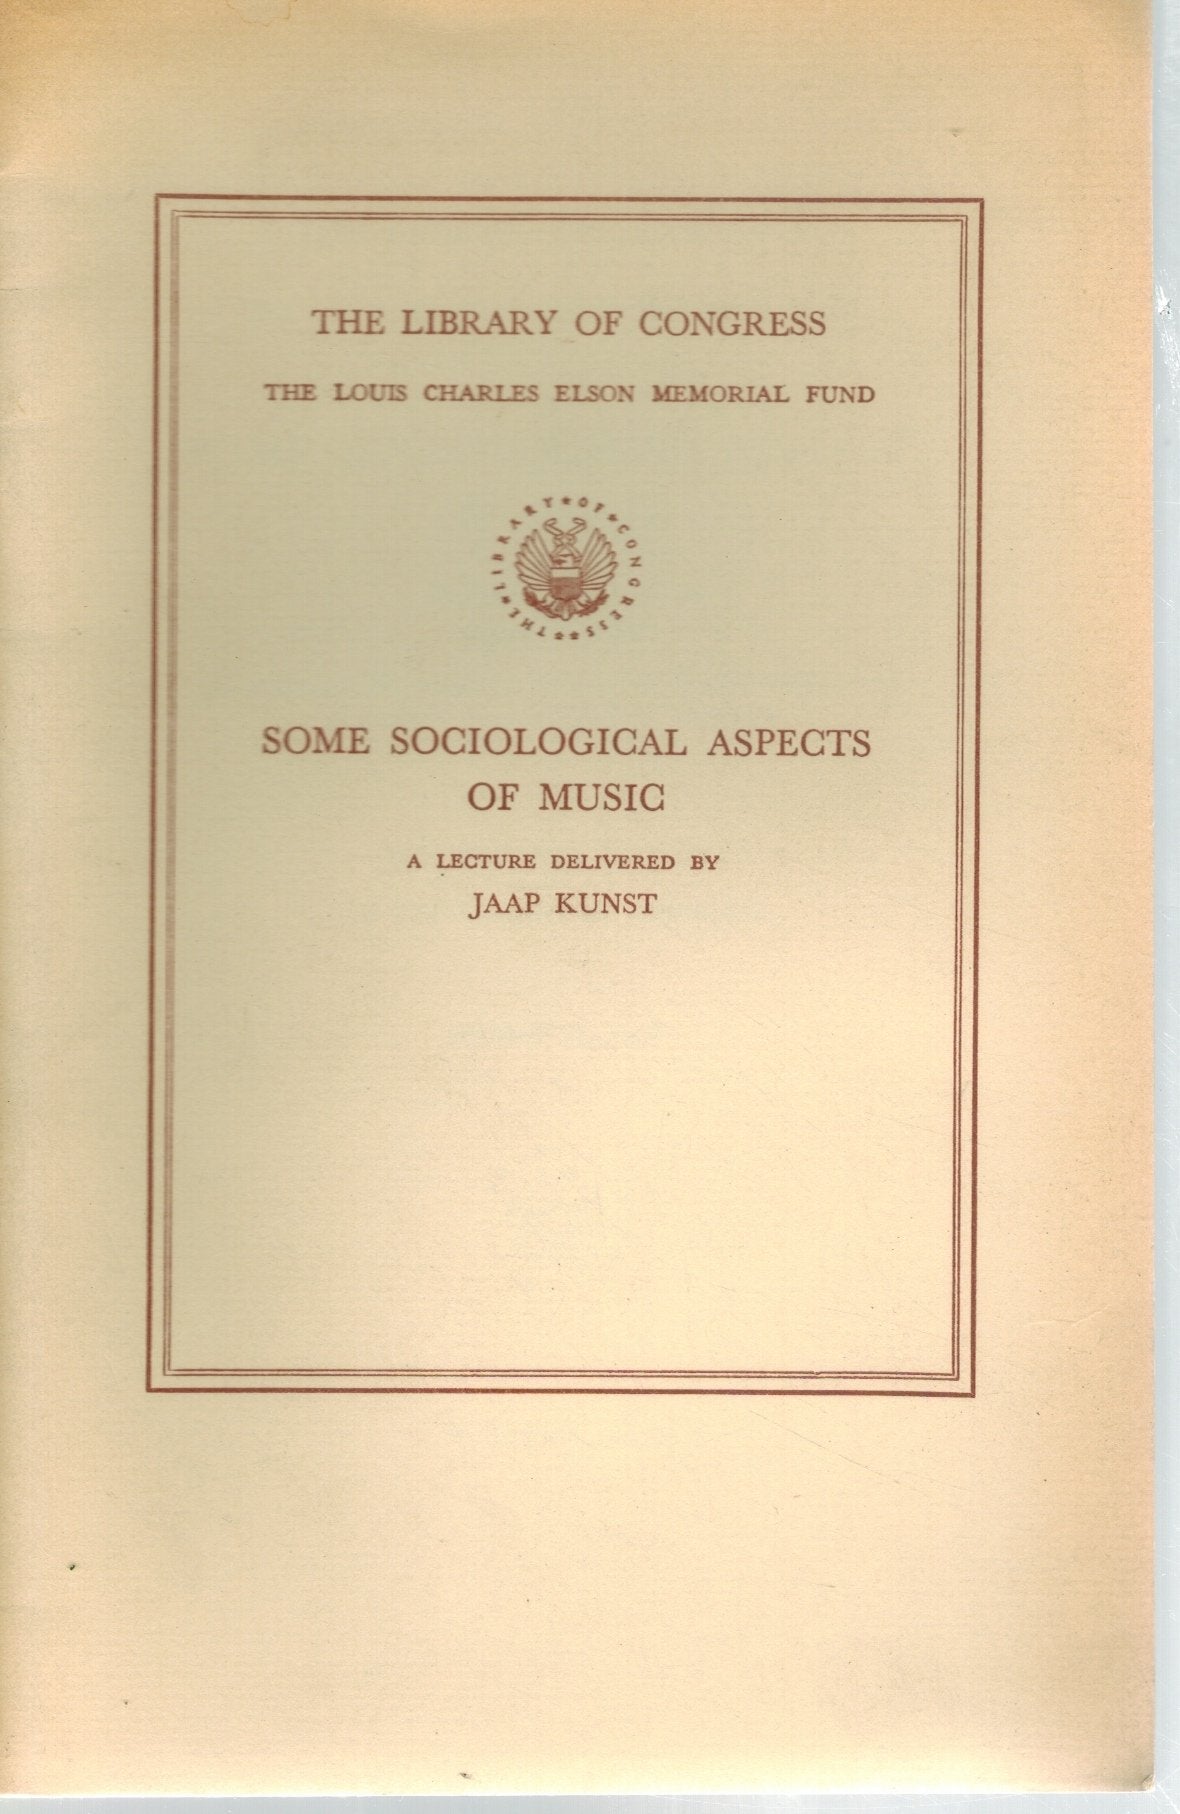 Some Sociological Aspects of Music. A lecture delivered.in the Whittall  Pavilion of the Library of Congress October 27, 1955.  by Kunst, Jaap